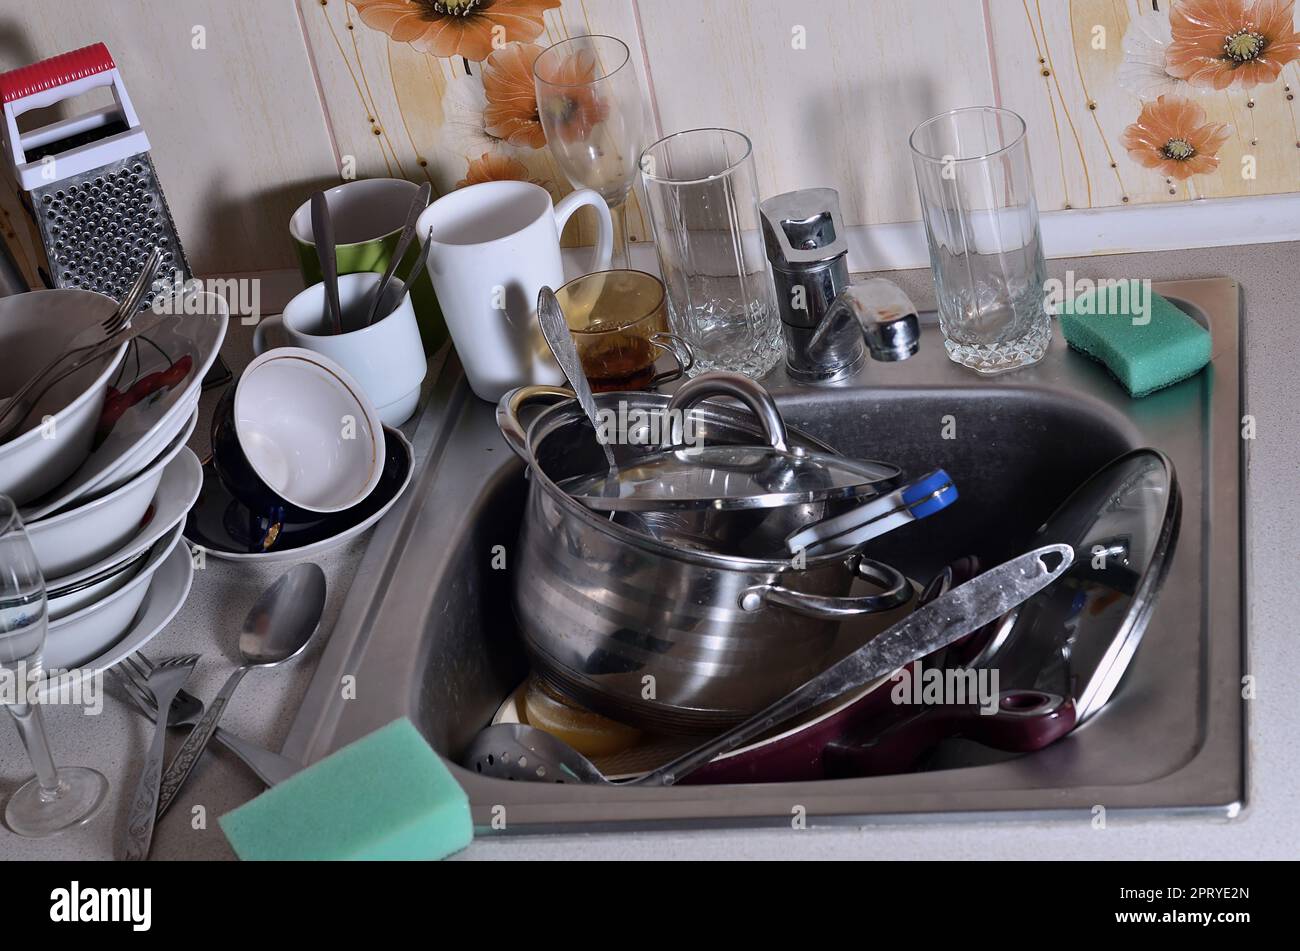 A huge pile of unwashed dishes in the kitchen sink and on the countertop. A lot of utensils and kitchen appliances before washing. The concept of dail Stock Photo